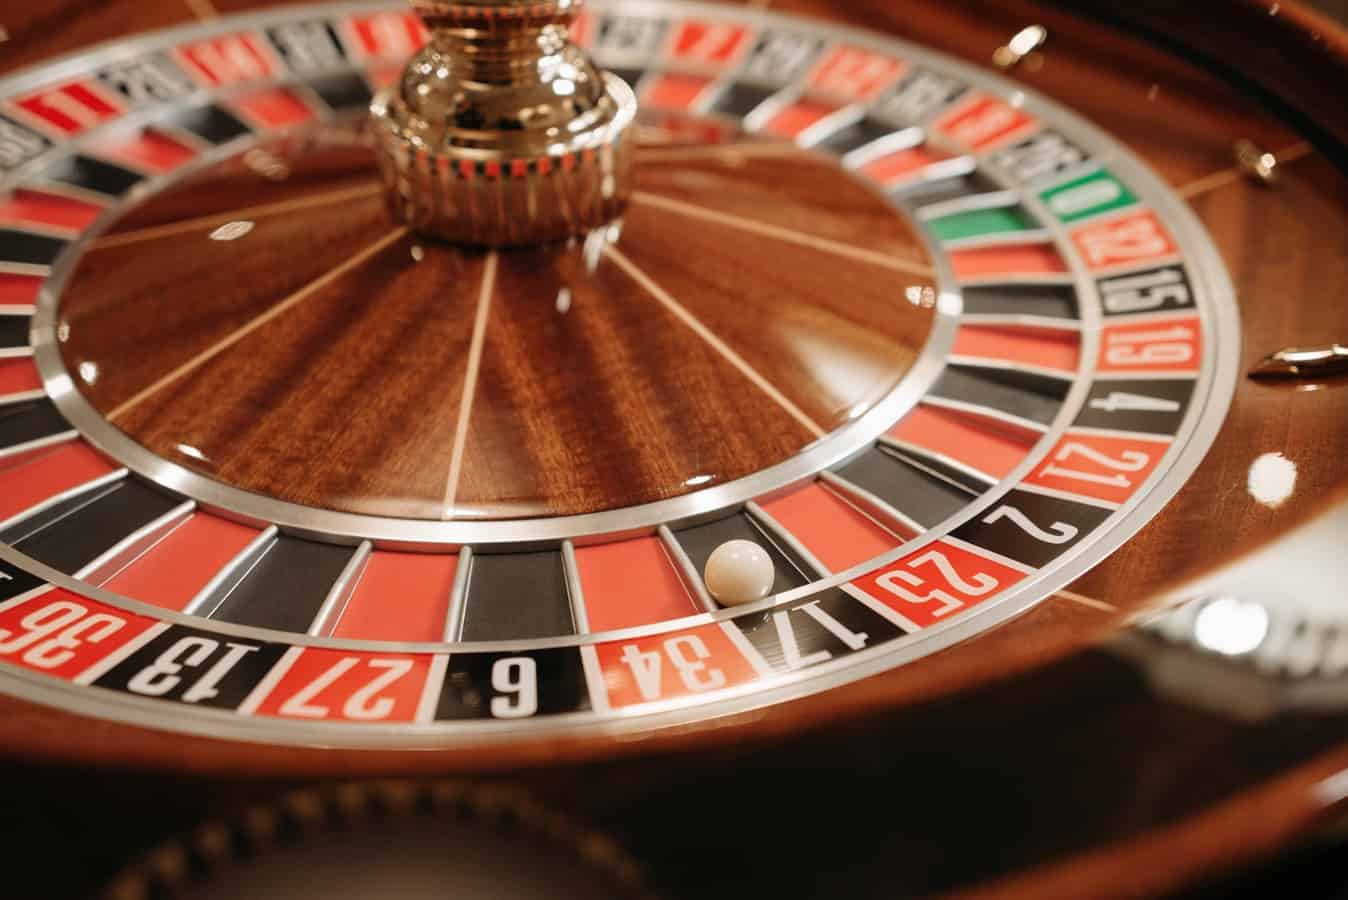 Top 3 Ways To Buy A Used best crypto casinos